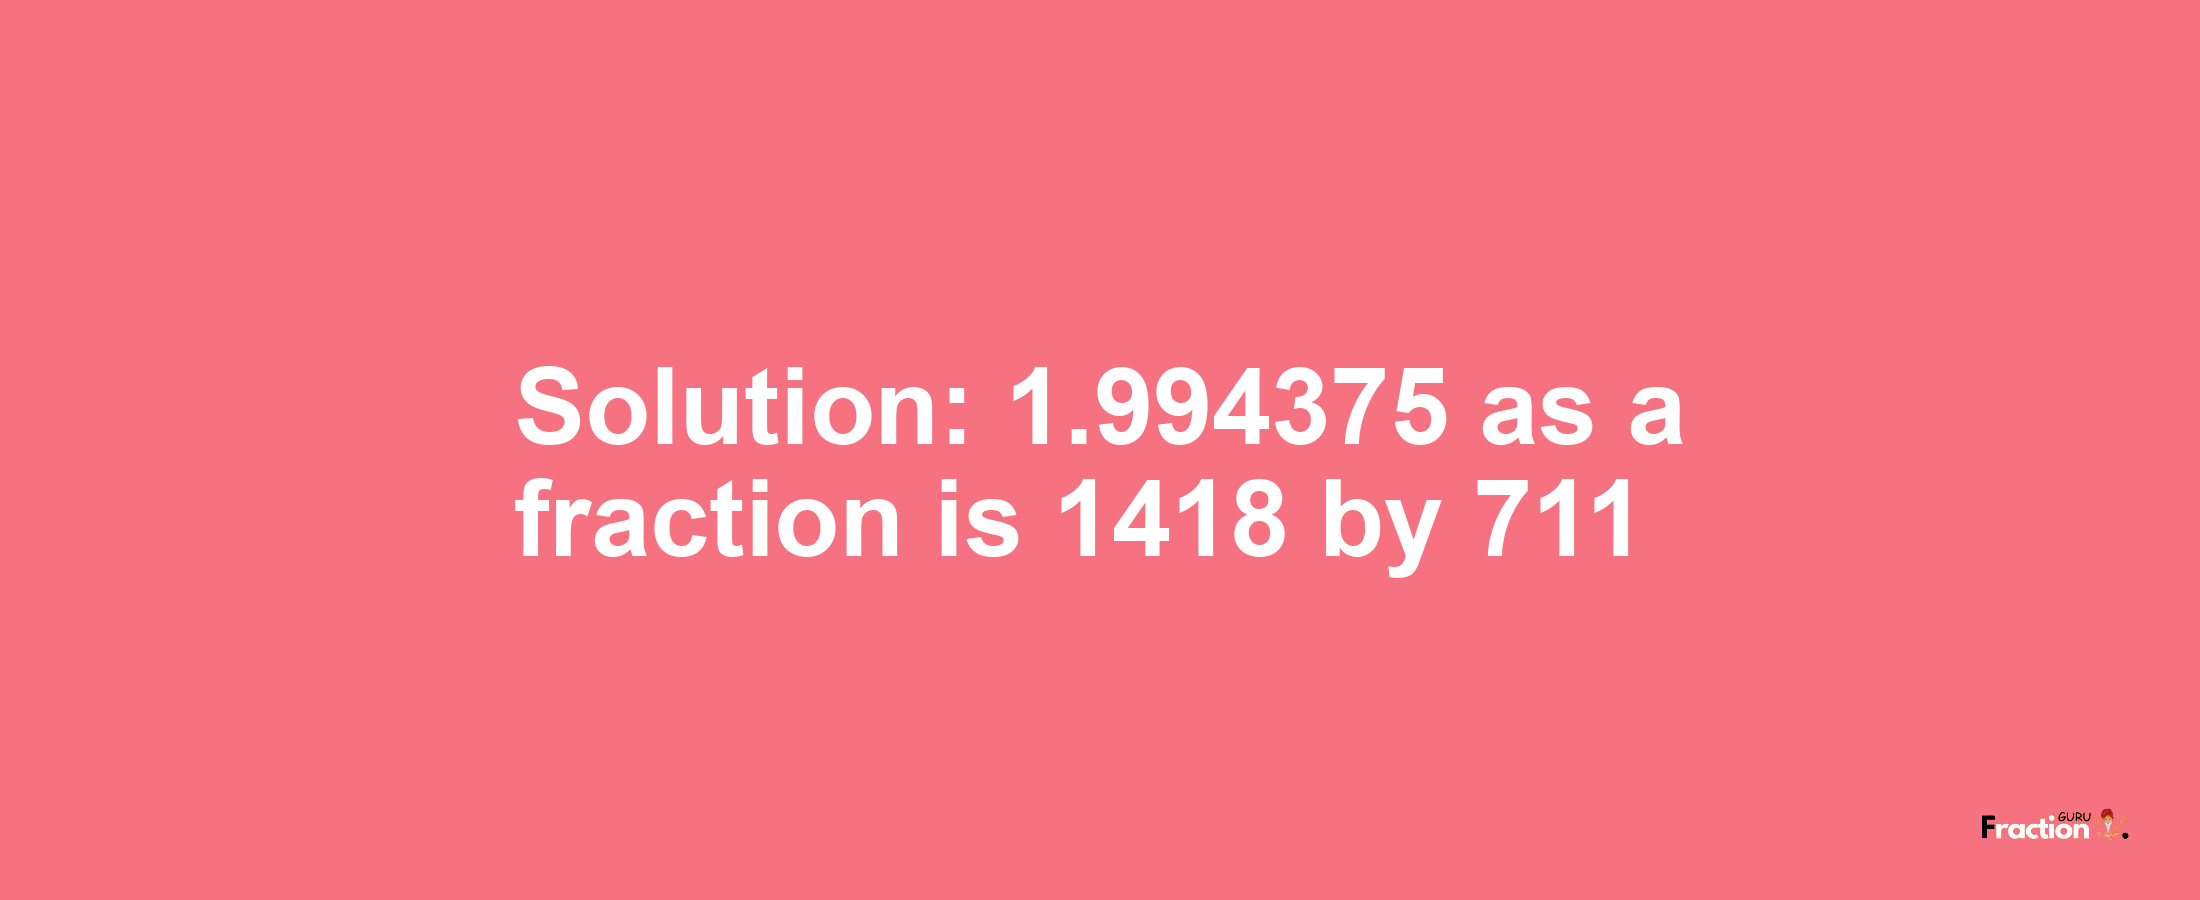 Solution:1.994375 as a fraction is 1418/711